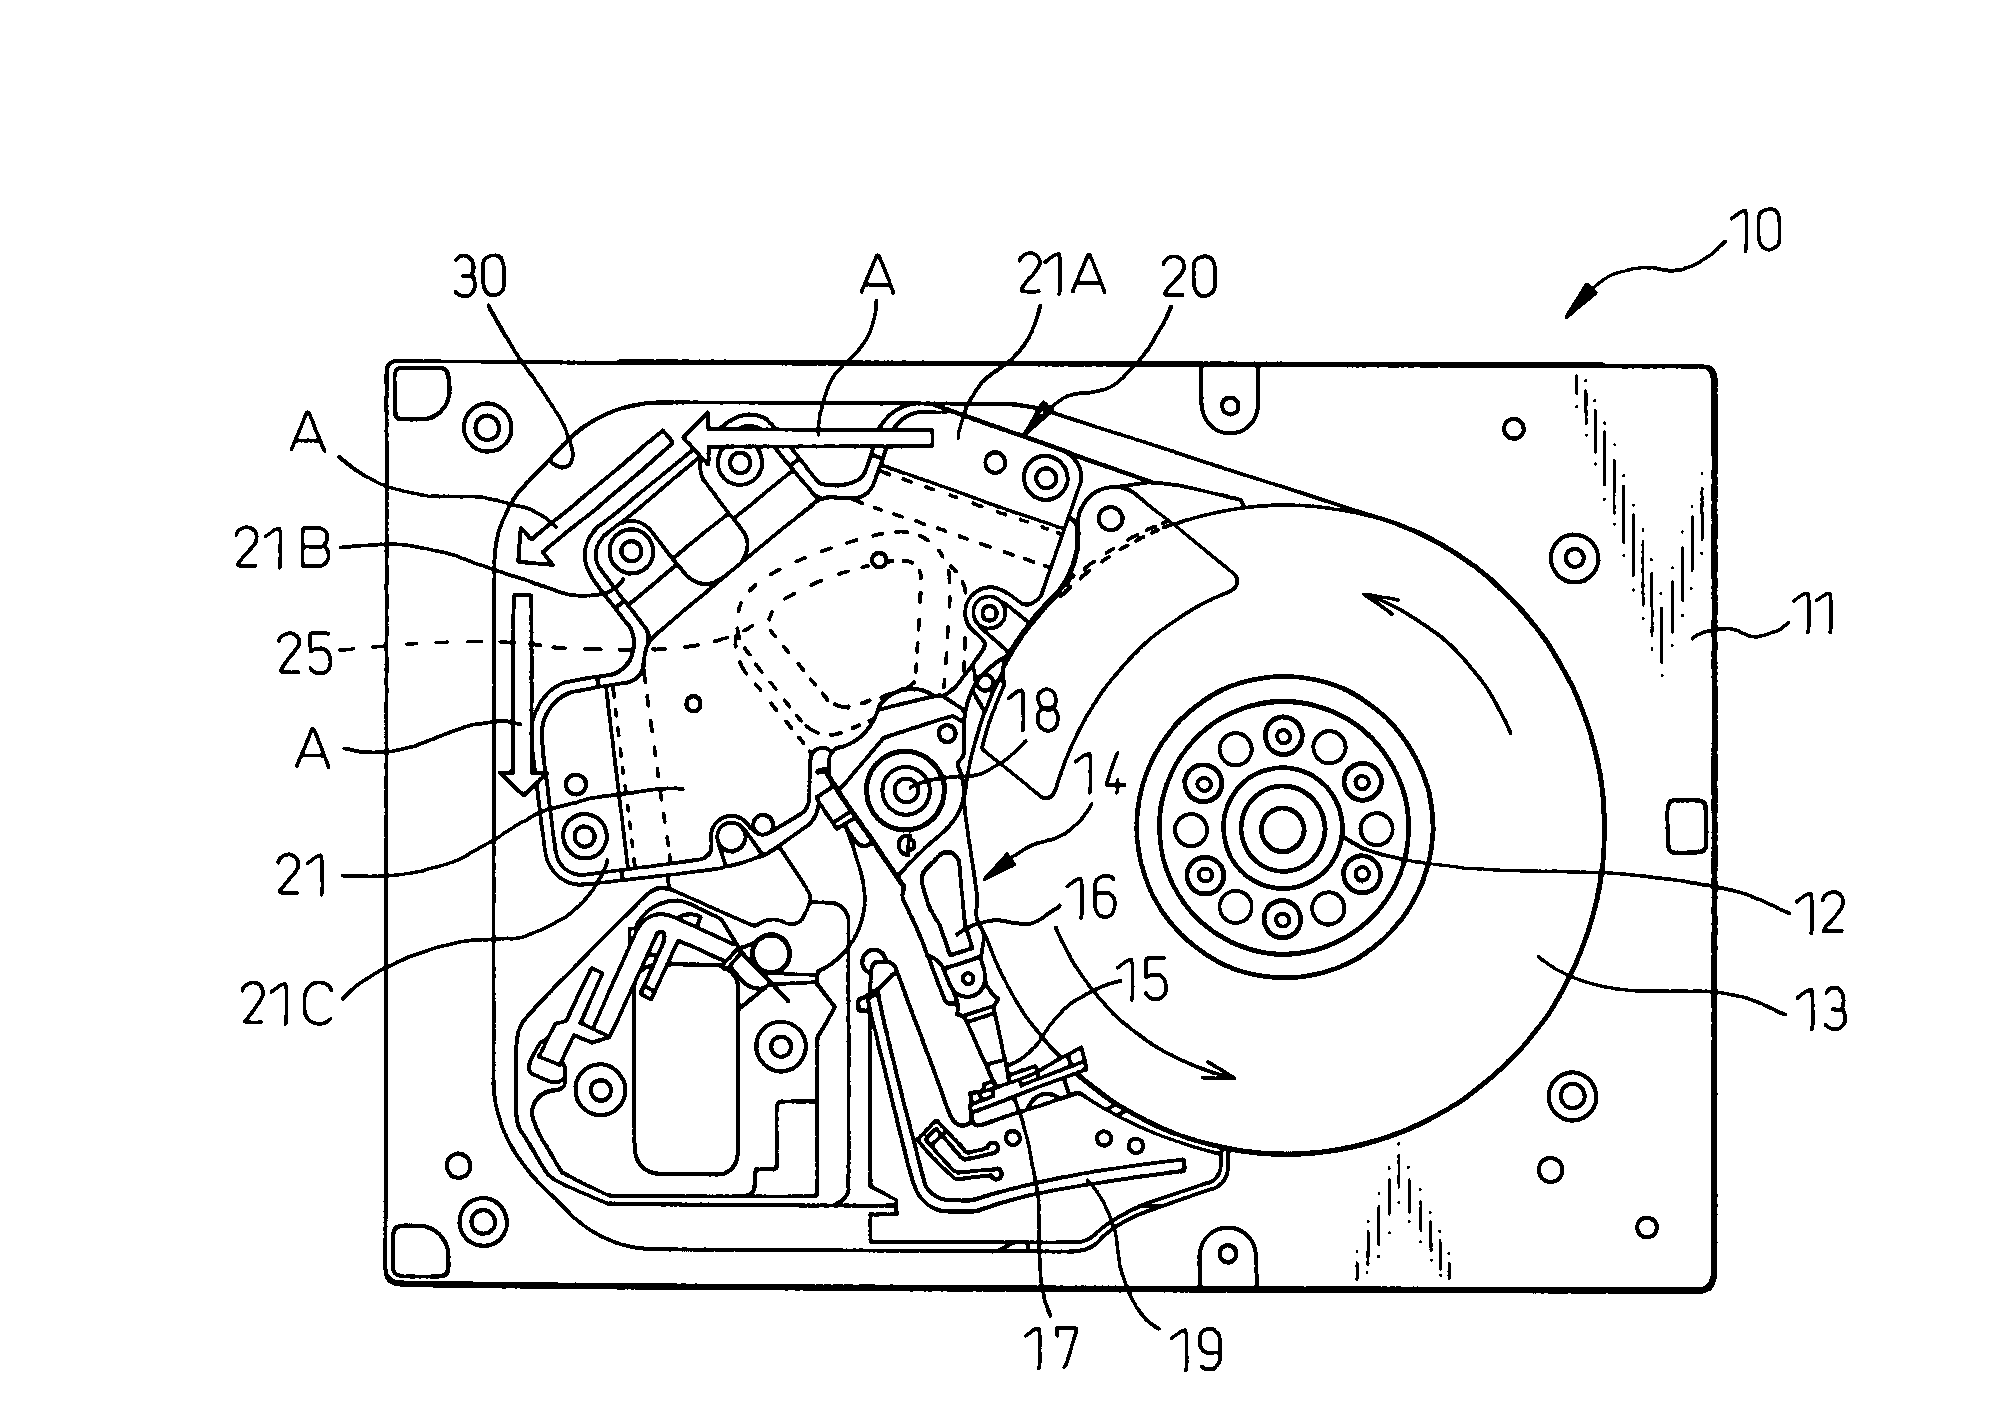 Cooling of head actuator of disk device